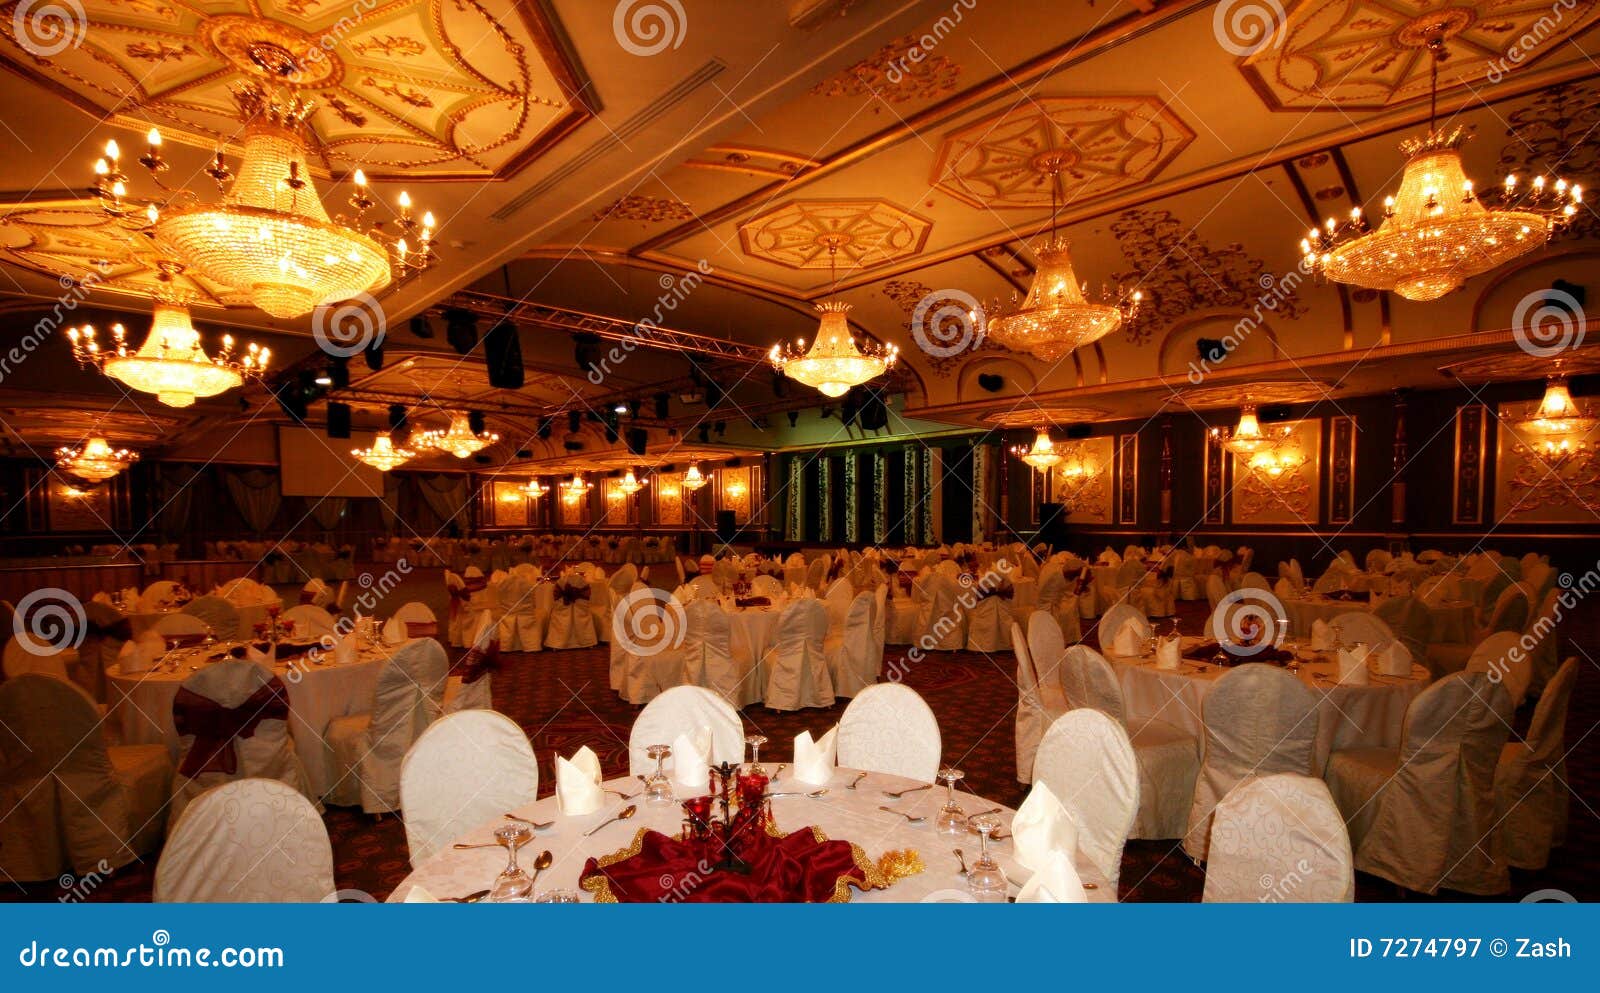 Banquet Hall Royalty Free Stock Photography - Image: 7274797